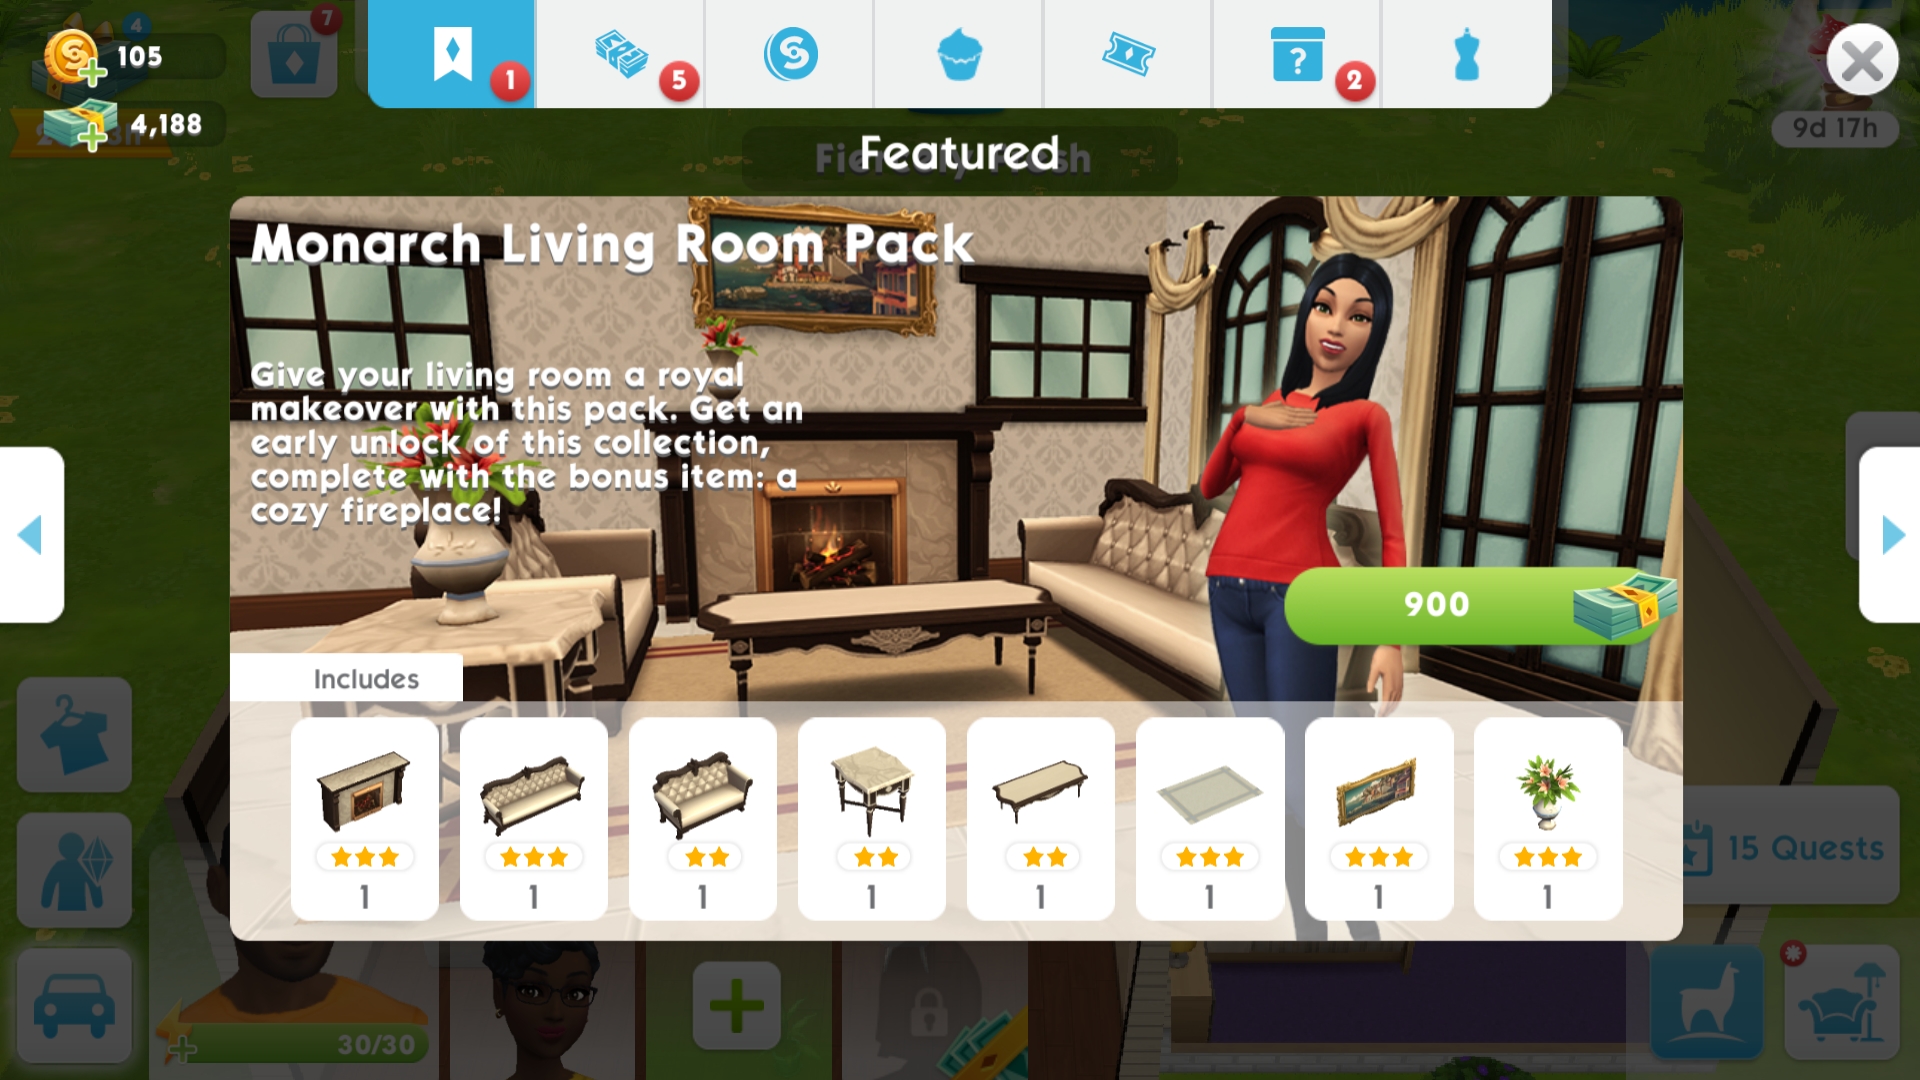 Monarch Living Room Pack